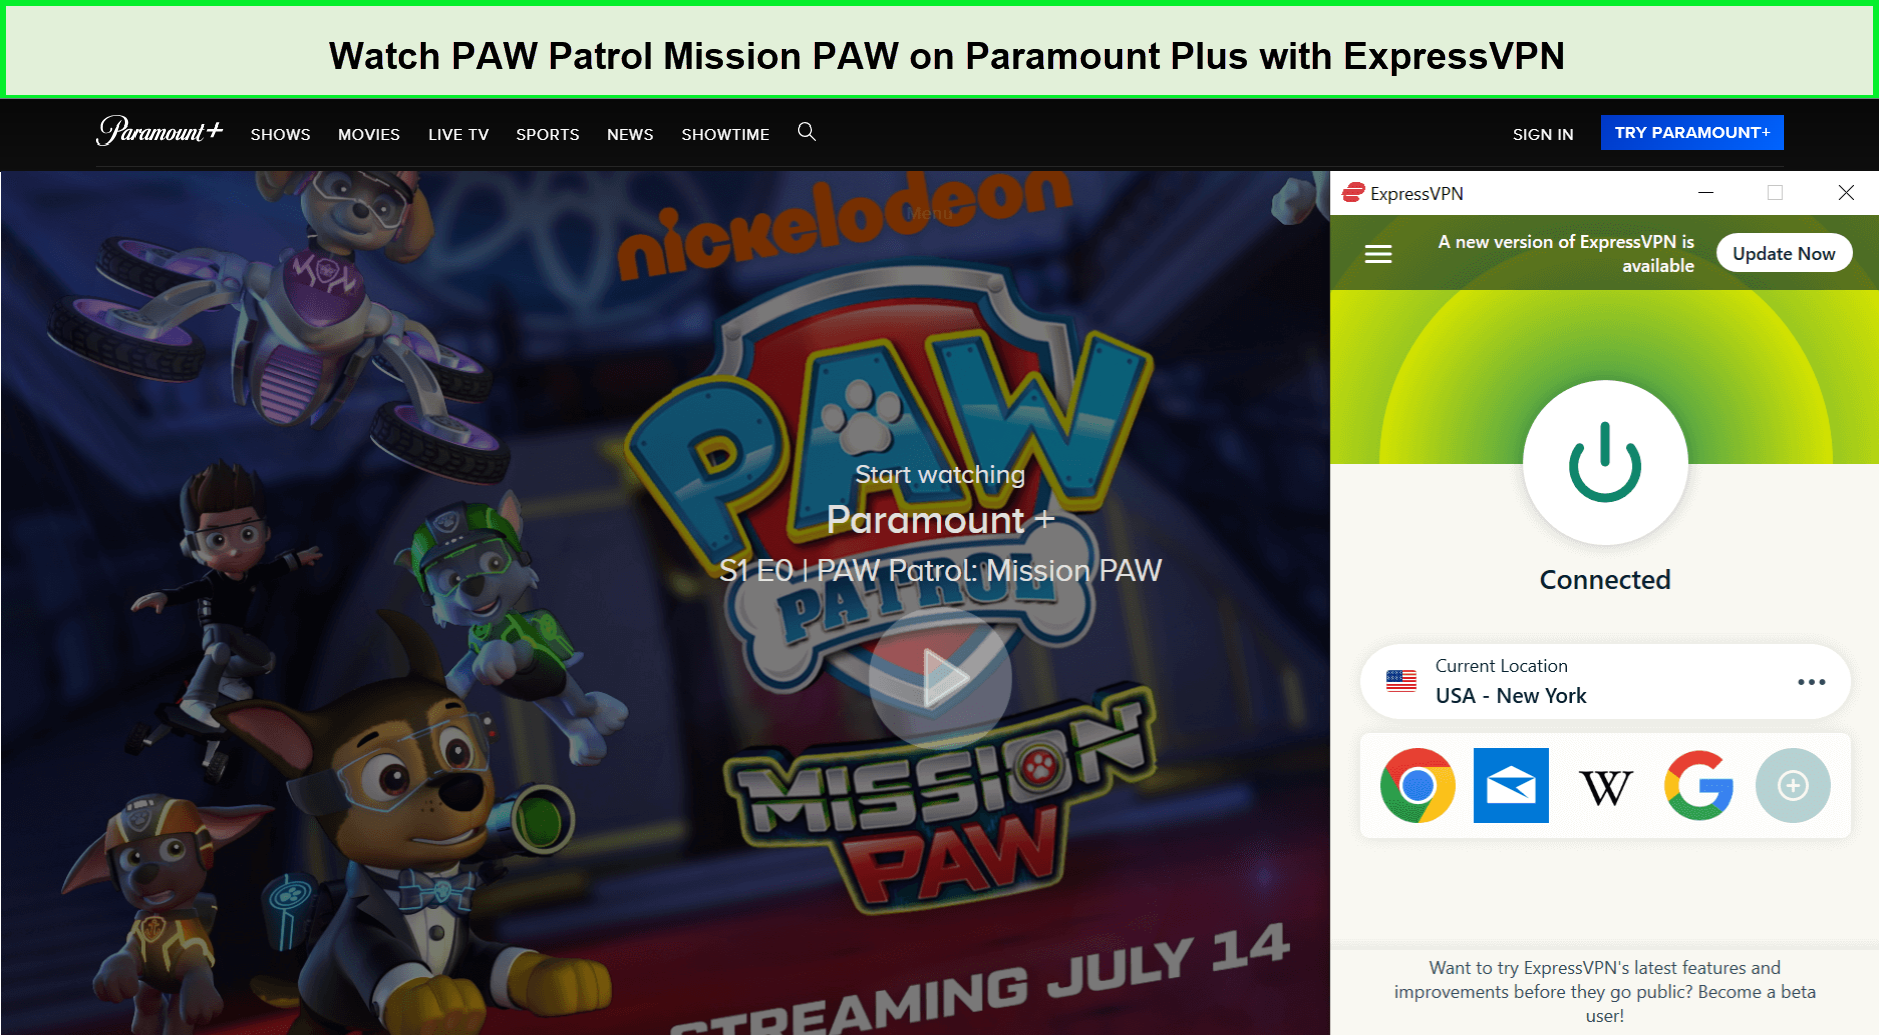 Watch-PAW-Patrol-Mission-PAW-in-Italy-on-Paramount-Plus-with-ExpressVPN